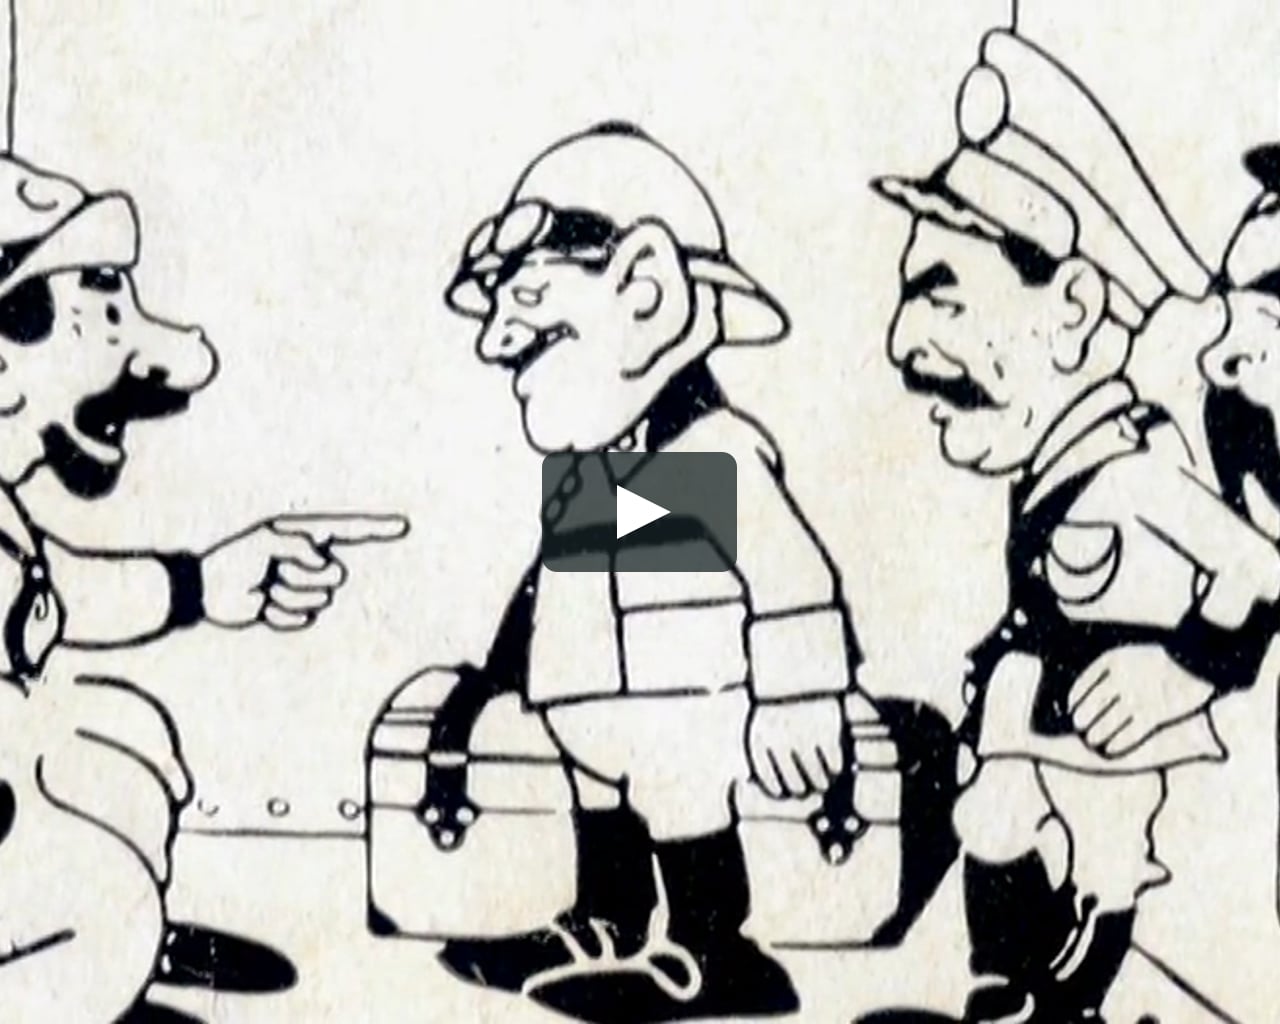 Quirino Cristiani - The Mystery of the First Animated Movies on Vimeo